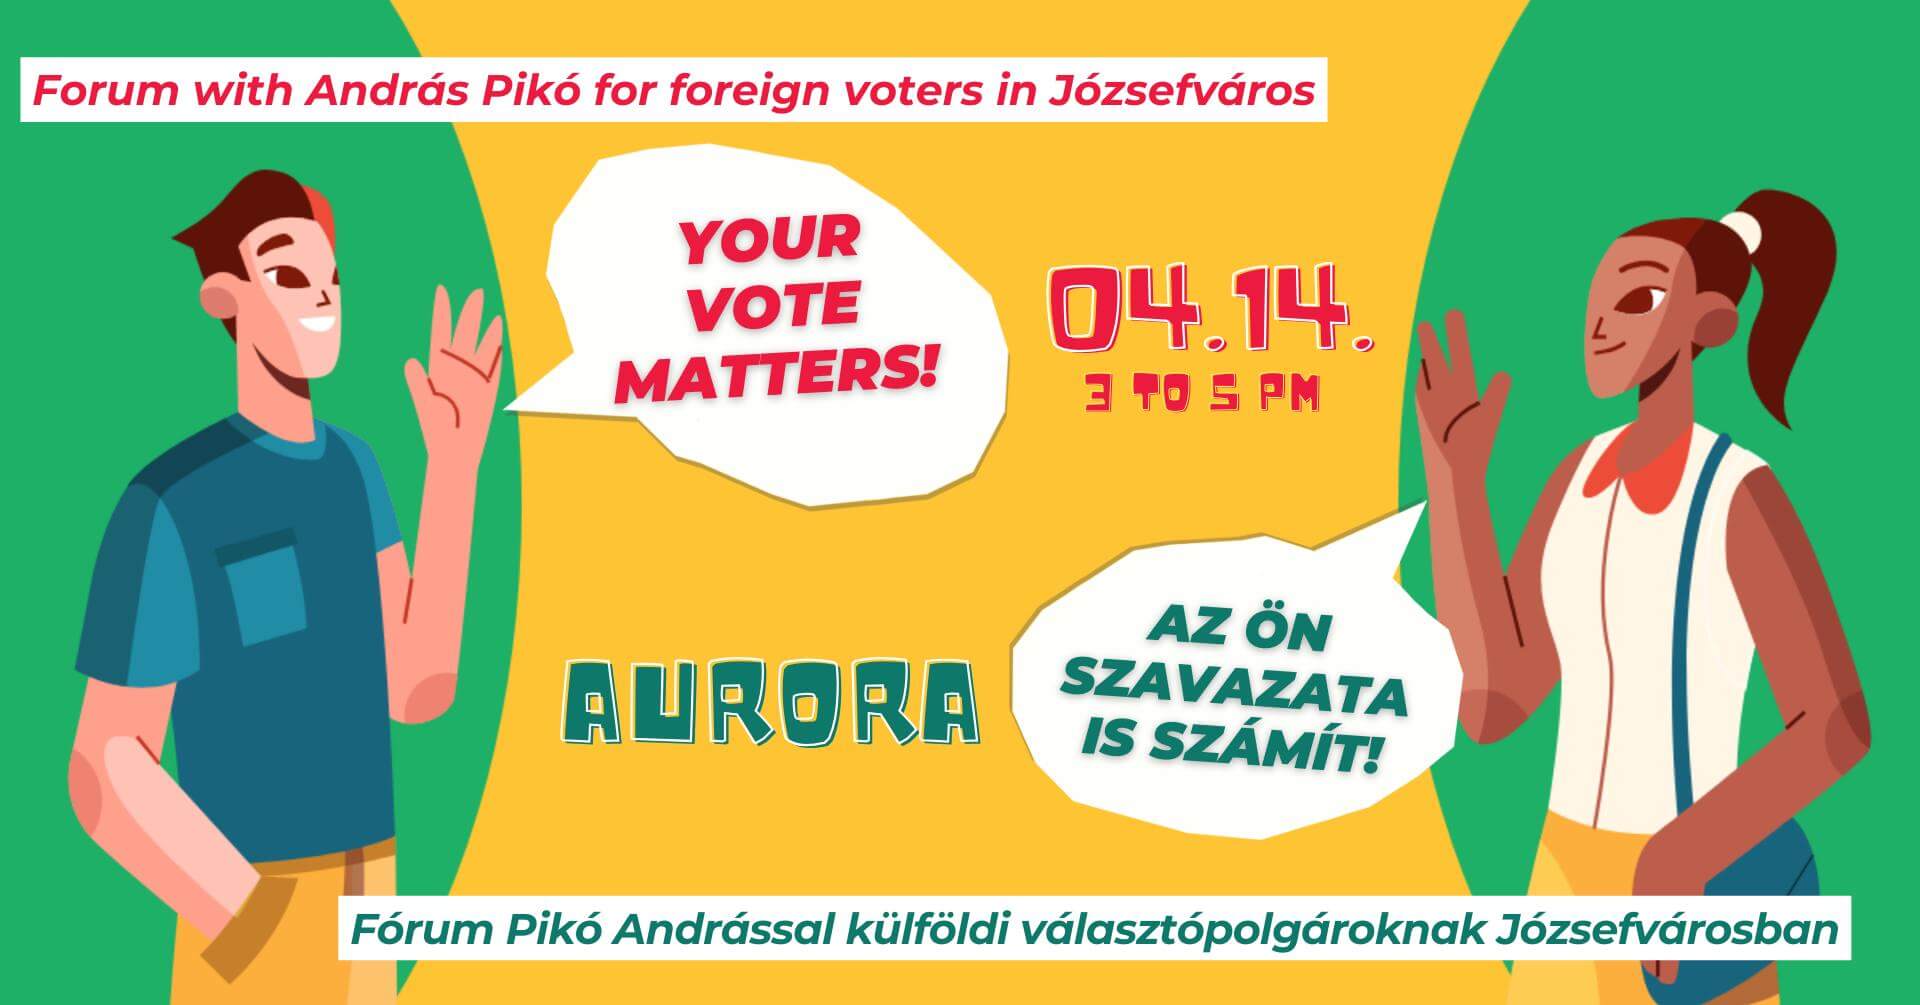 Forum with András Pikó for Foreign Voters in Józsefváros, Budapest, 14 April